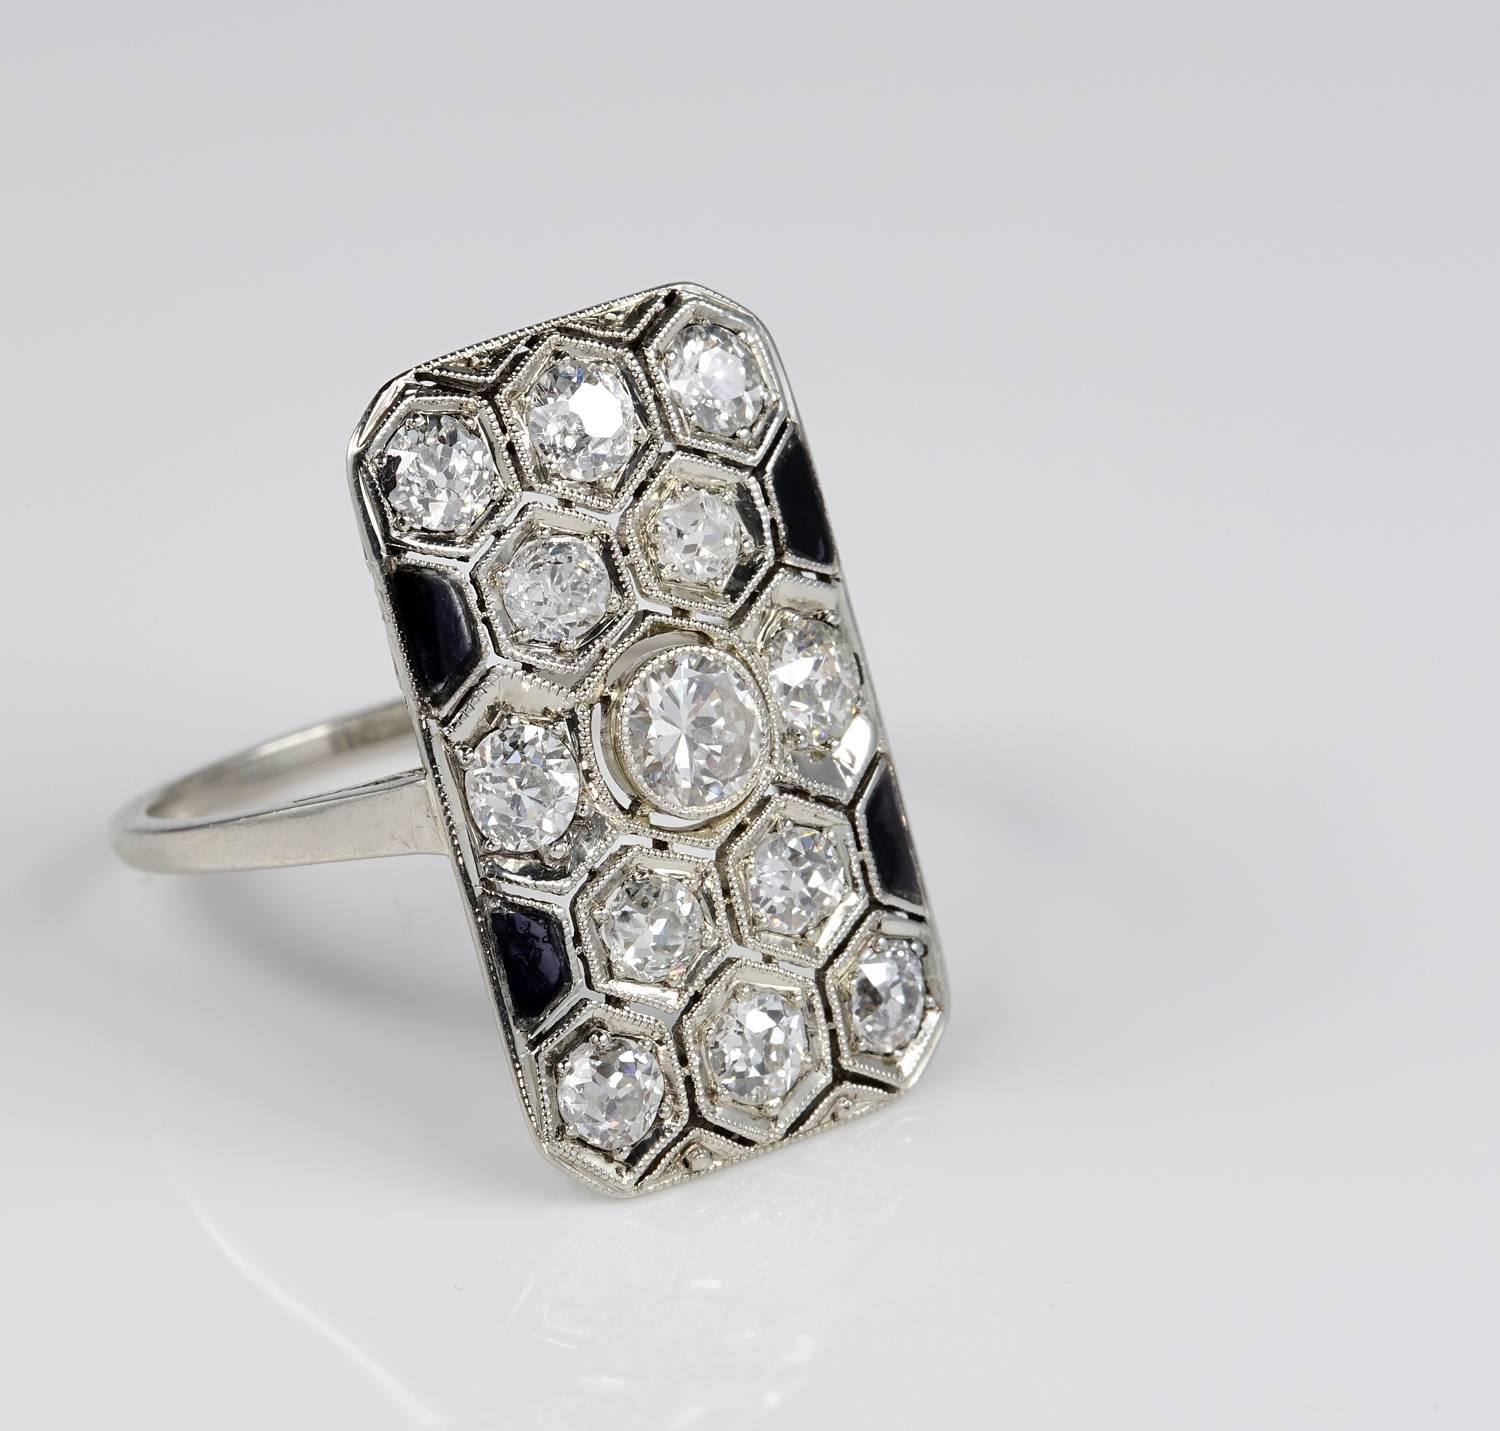 
This very special authentic Art Deco ring is fully marked for being from the Austro Hungarian em pire - 1920 ca
It is a magnificent panel ring in vogue during during the very early beginning of last century
Skilfully hand crafted of solid 18 Kt